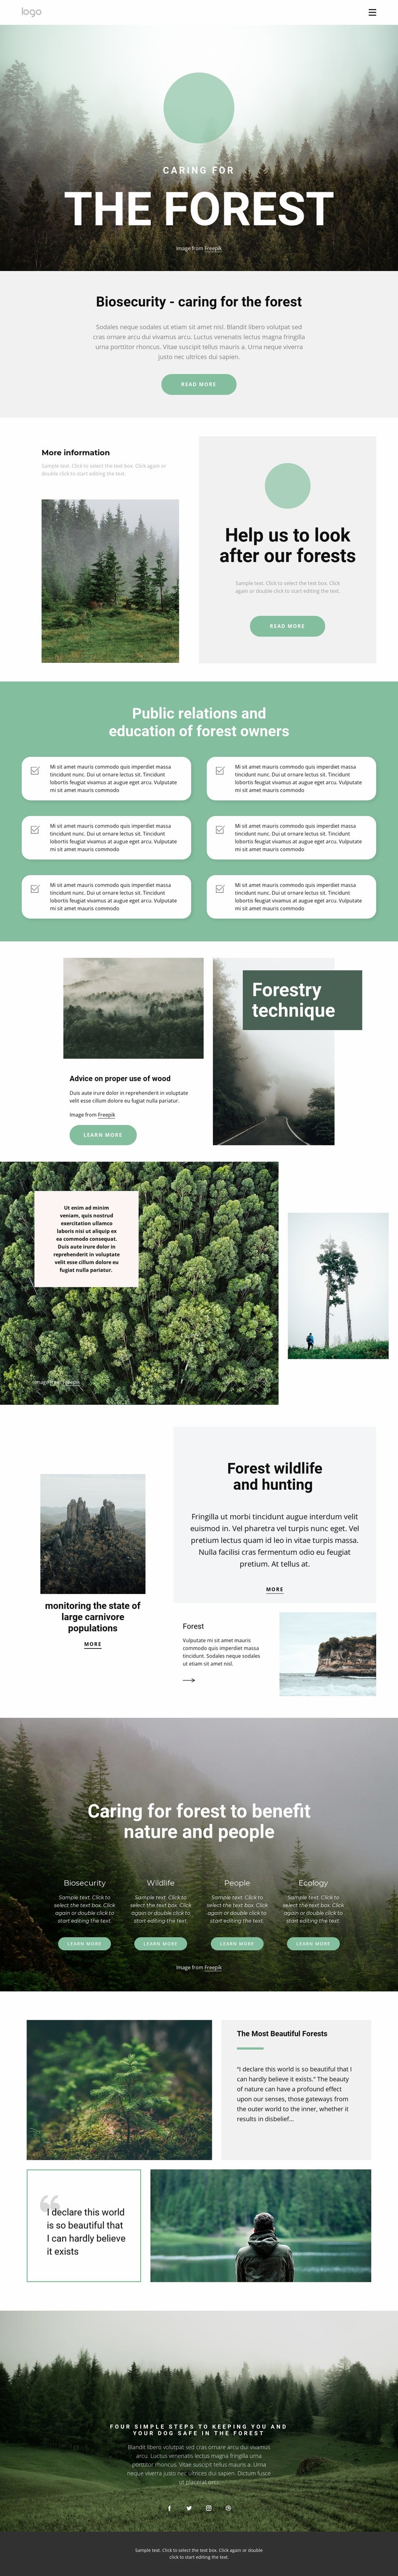 Caring for parks and forests Wysiwyg Editor Html 